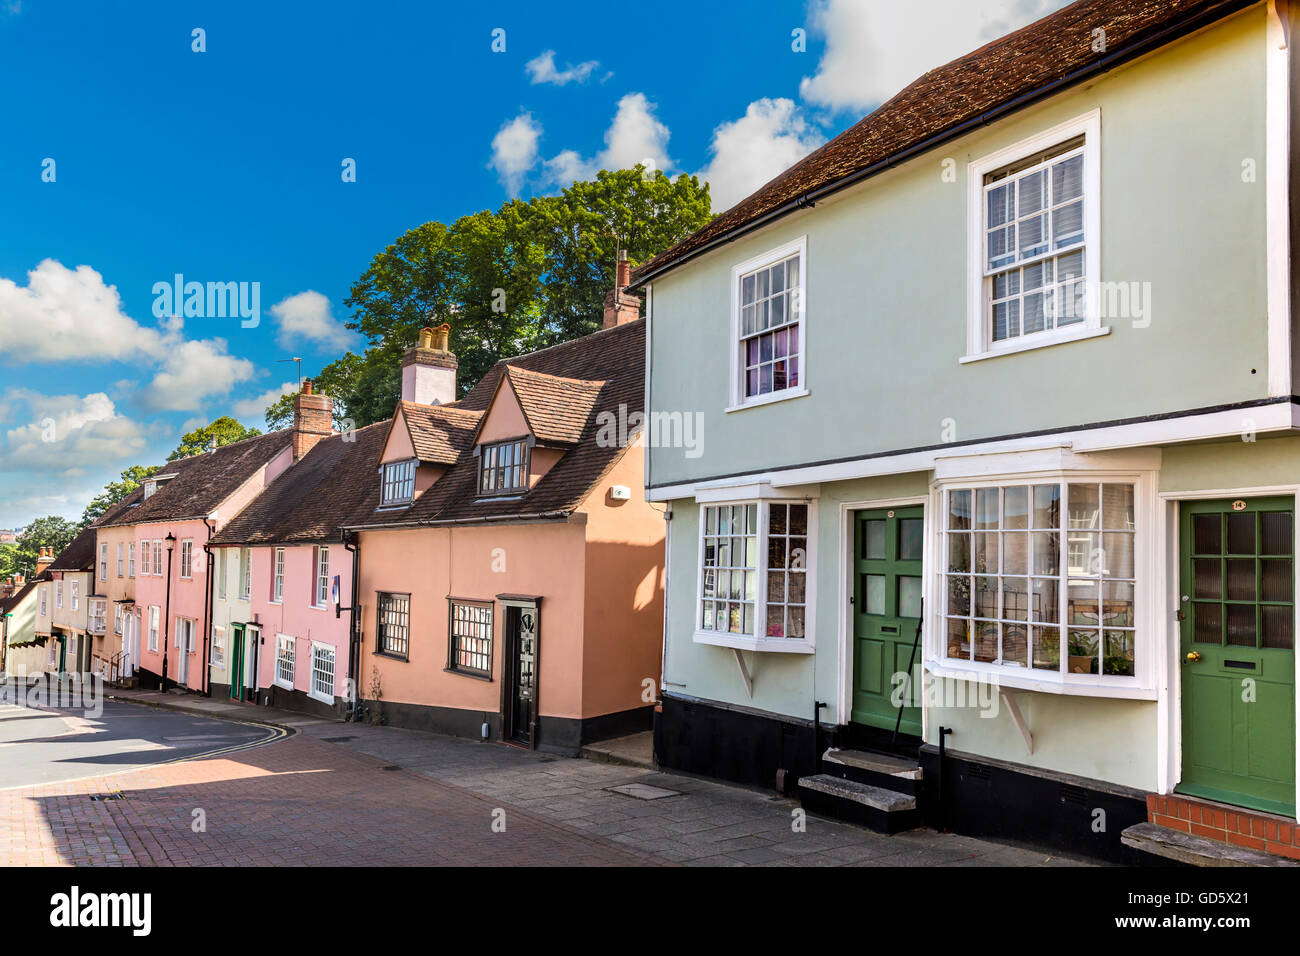 THE DUTCH QUARTER IN COLCHESTER, FULL OF PRETTY STREETS AND HOUSES WHERE THE FLEMISH REFUGEES LIVED FROM 1575 Stock Photo